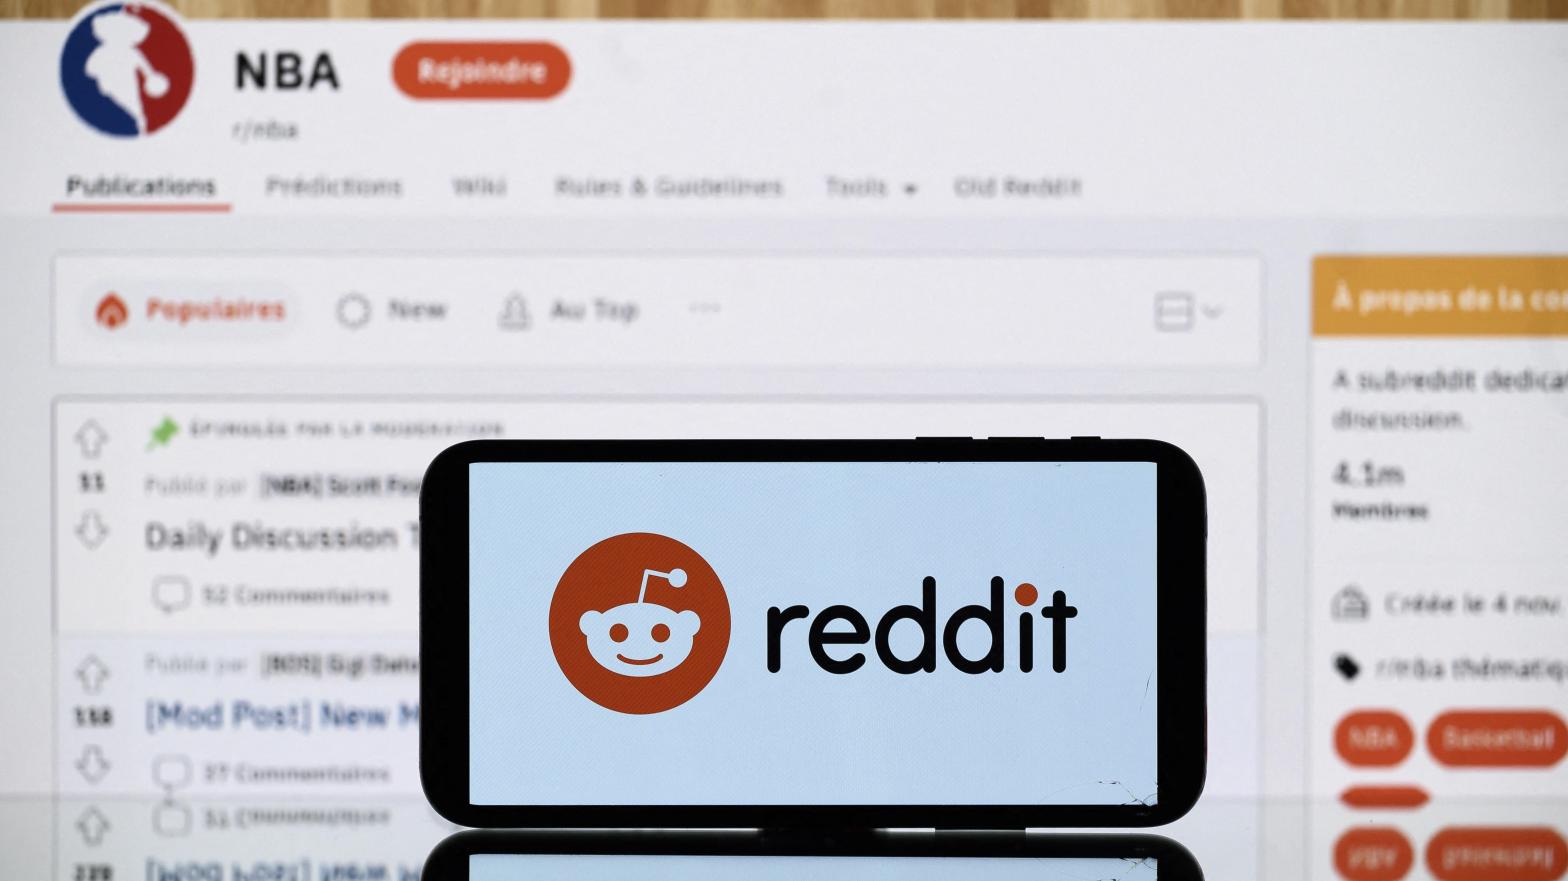 Reddit is in the process of adding support for third-party bot developers on its platform. (Photo: LIONEL BONAVENTURE/AFP, Getty Images)